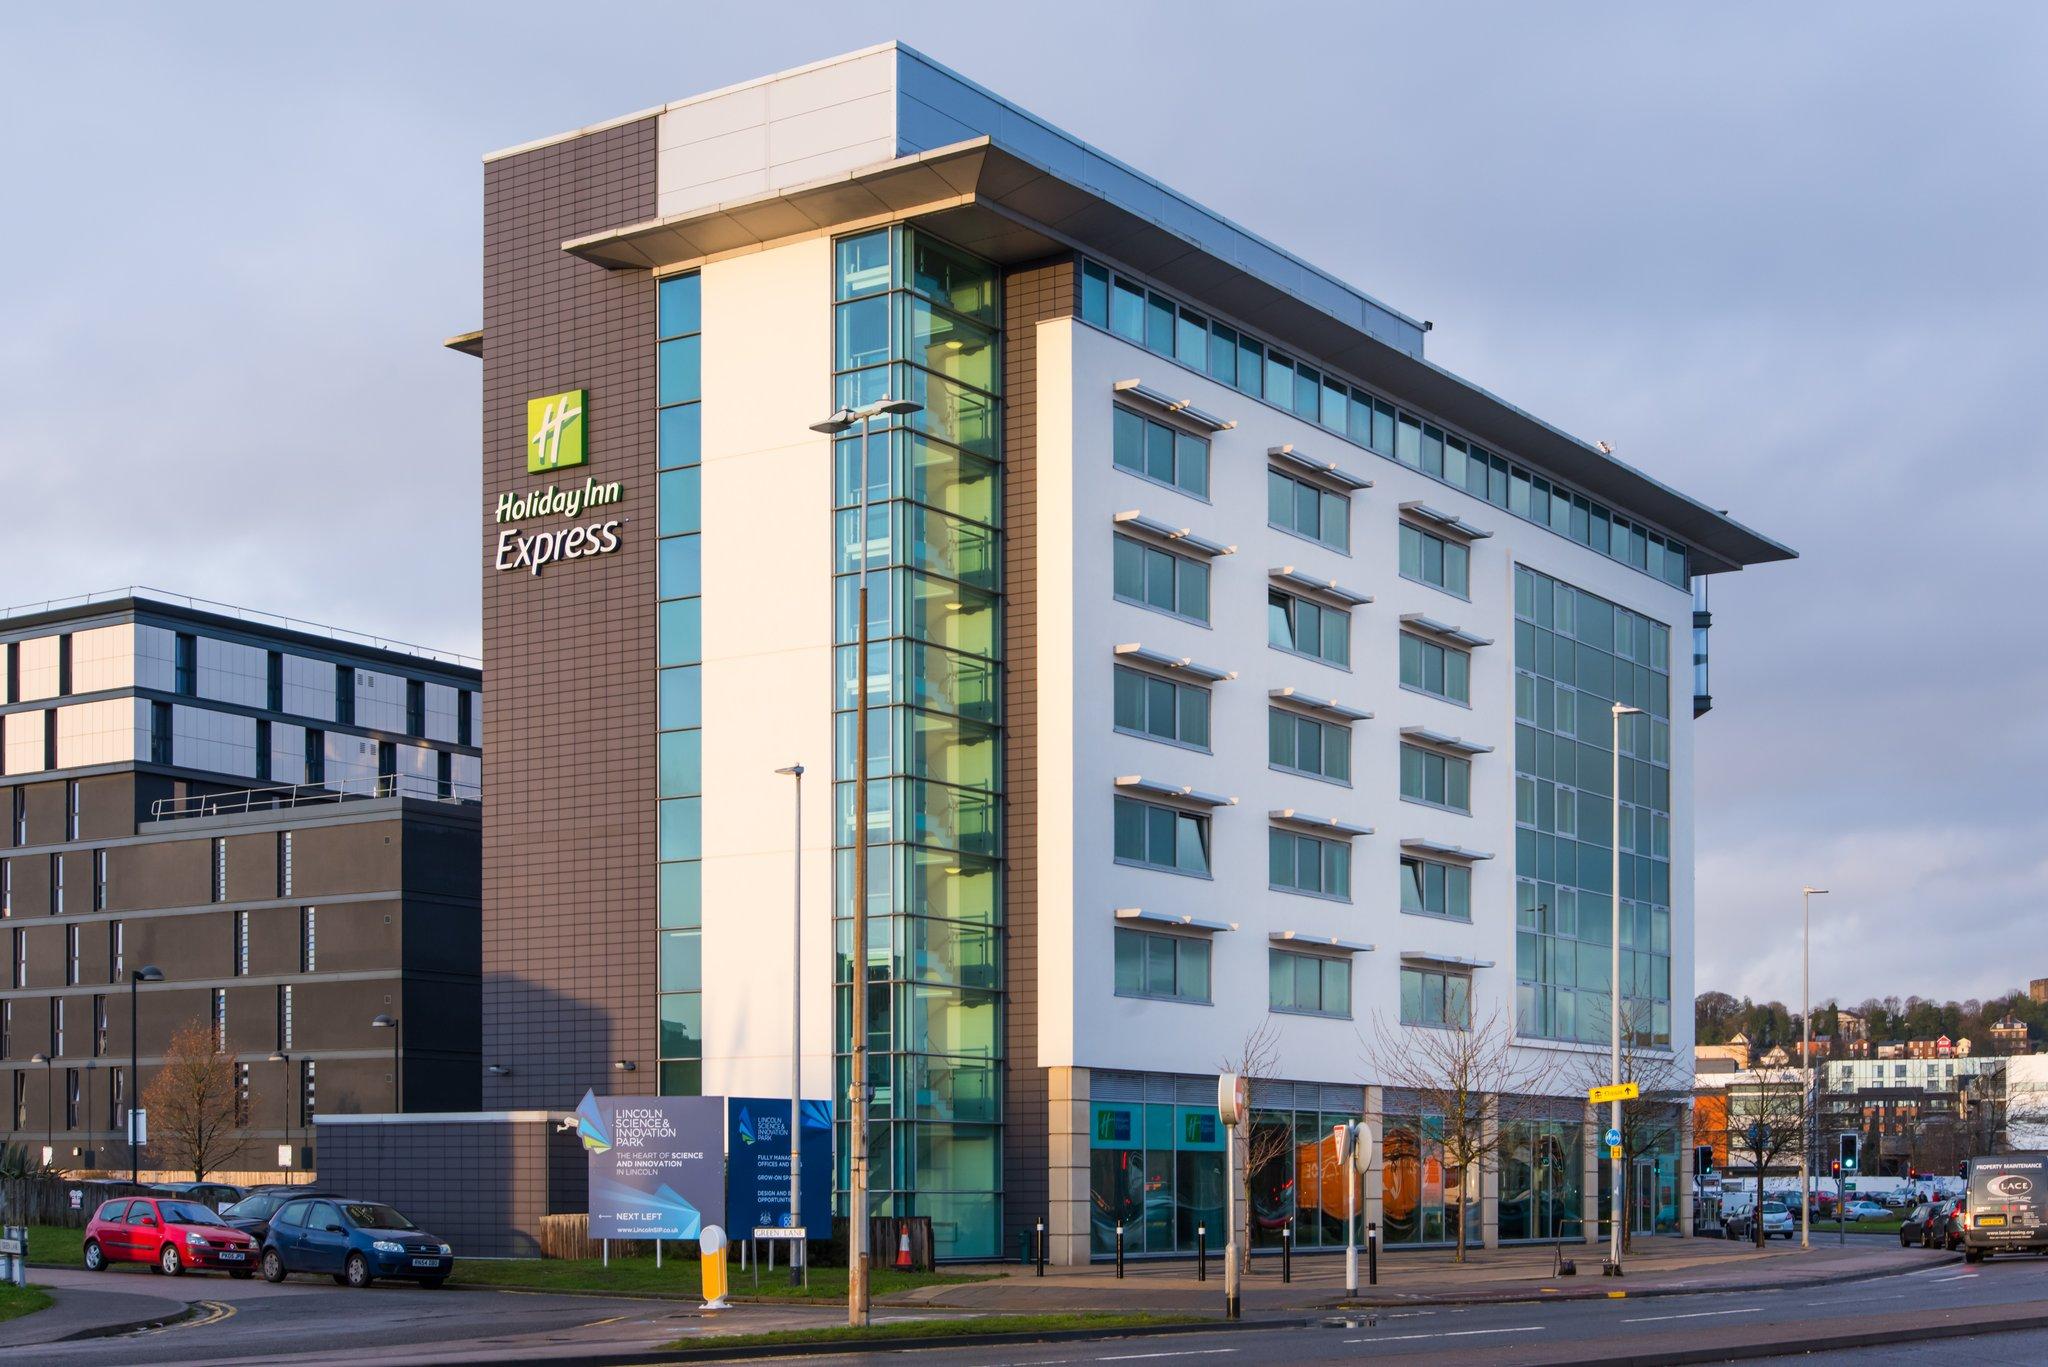 Holiday Inn Express Lincoln City Centre in Lincoln, GB1